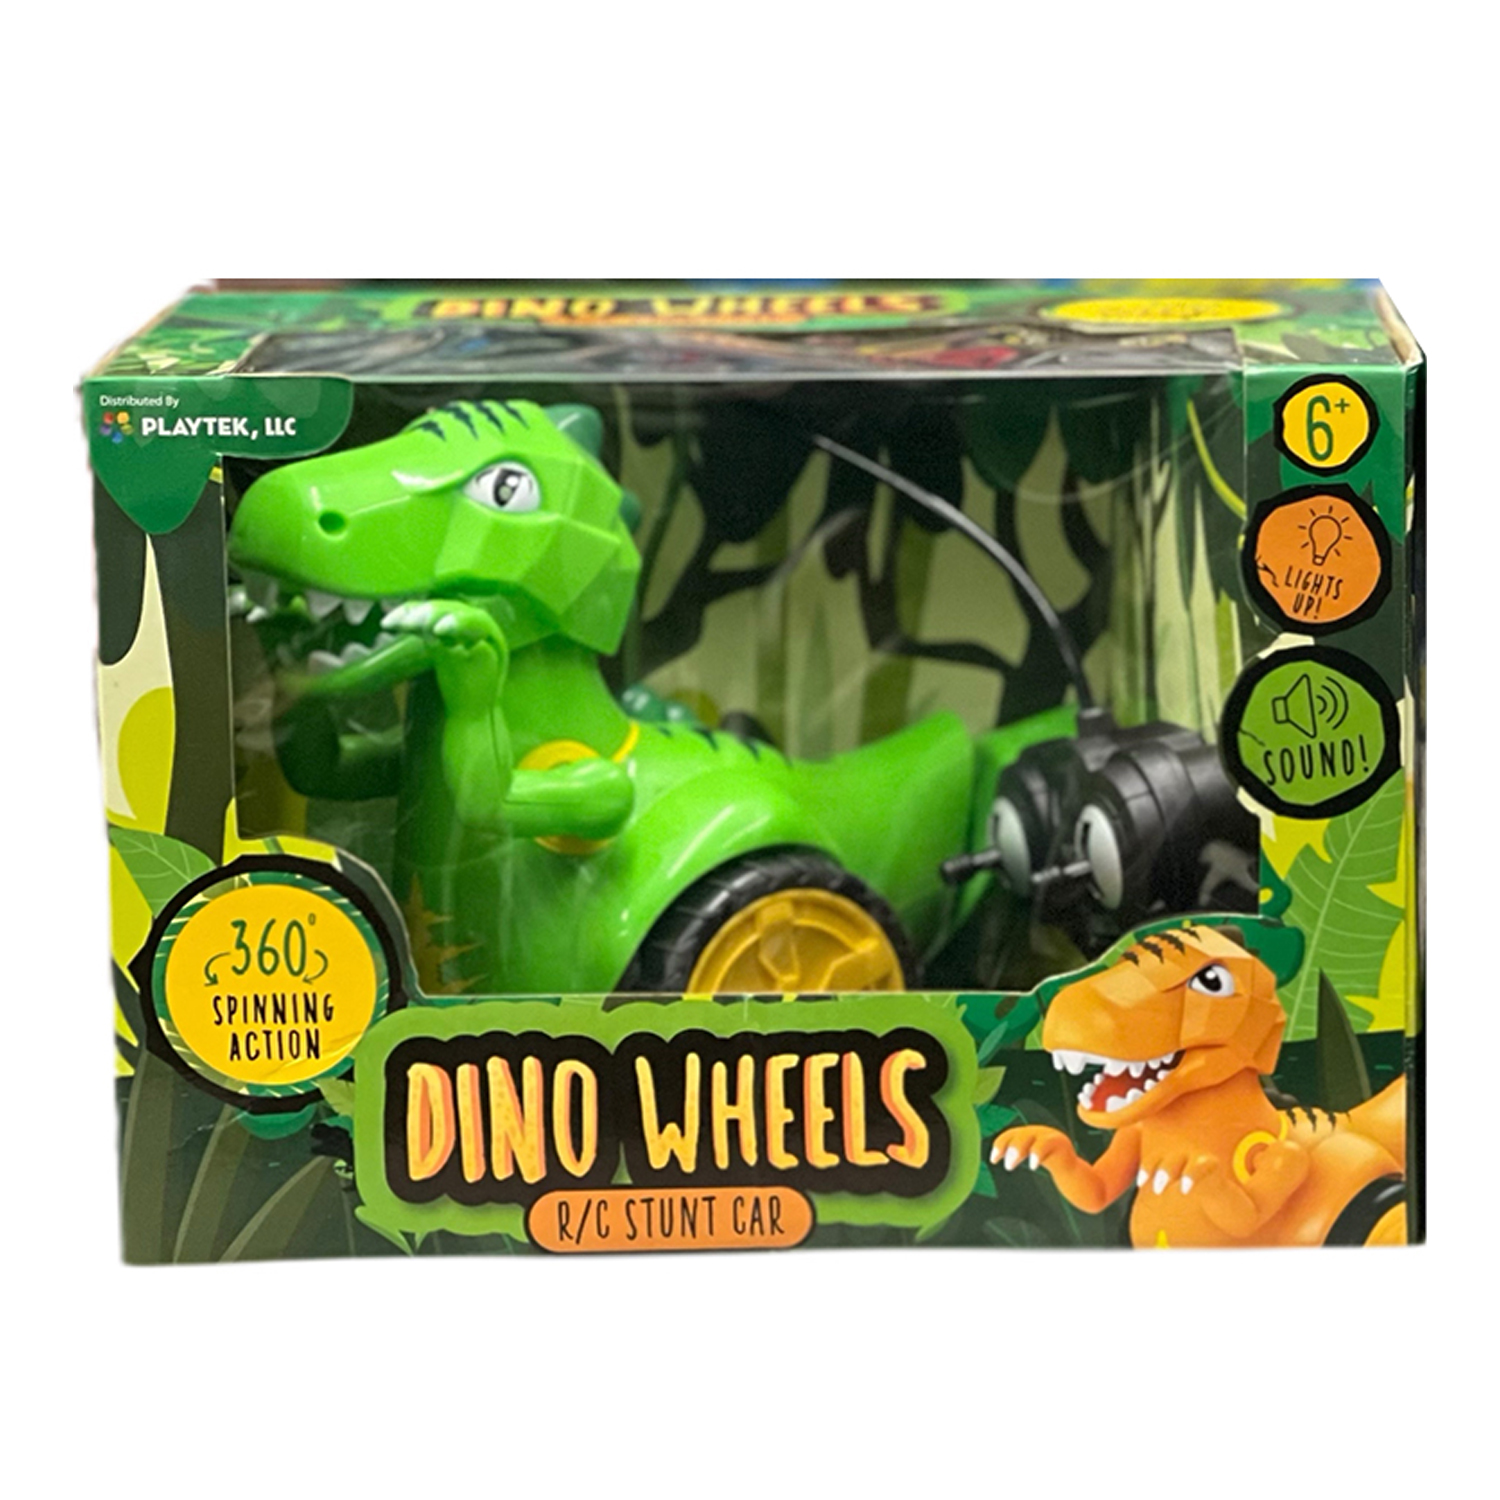 Dino Wheels, R/C stunt car with sounds and lights